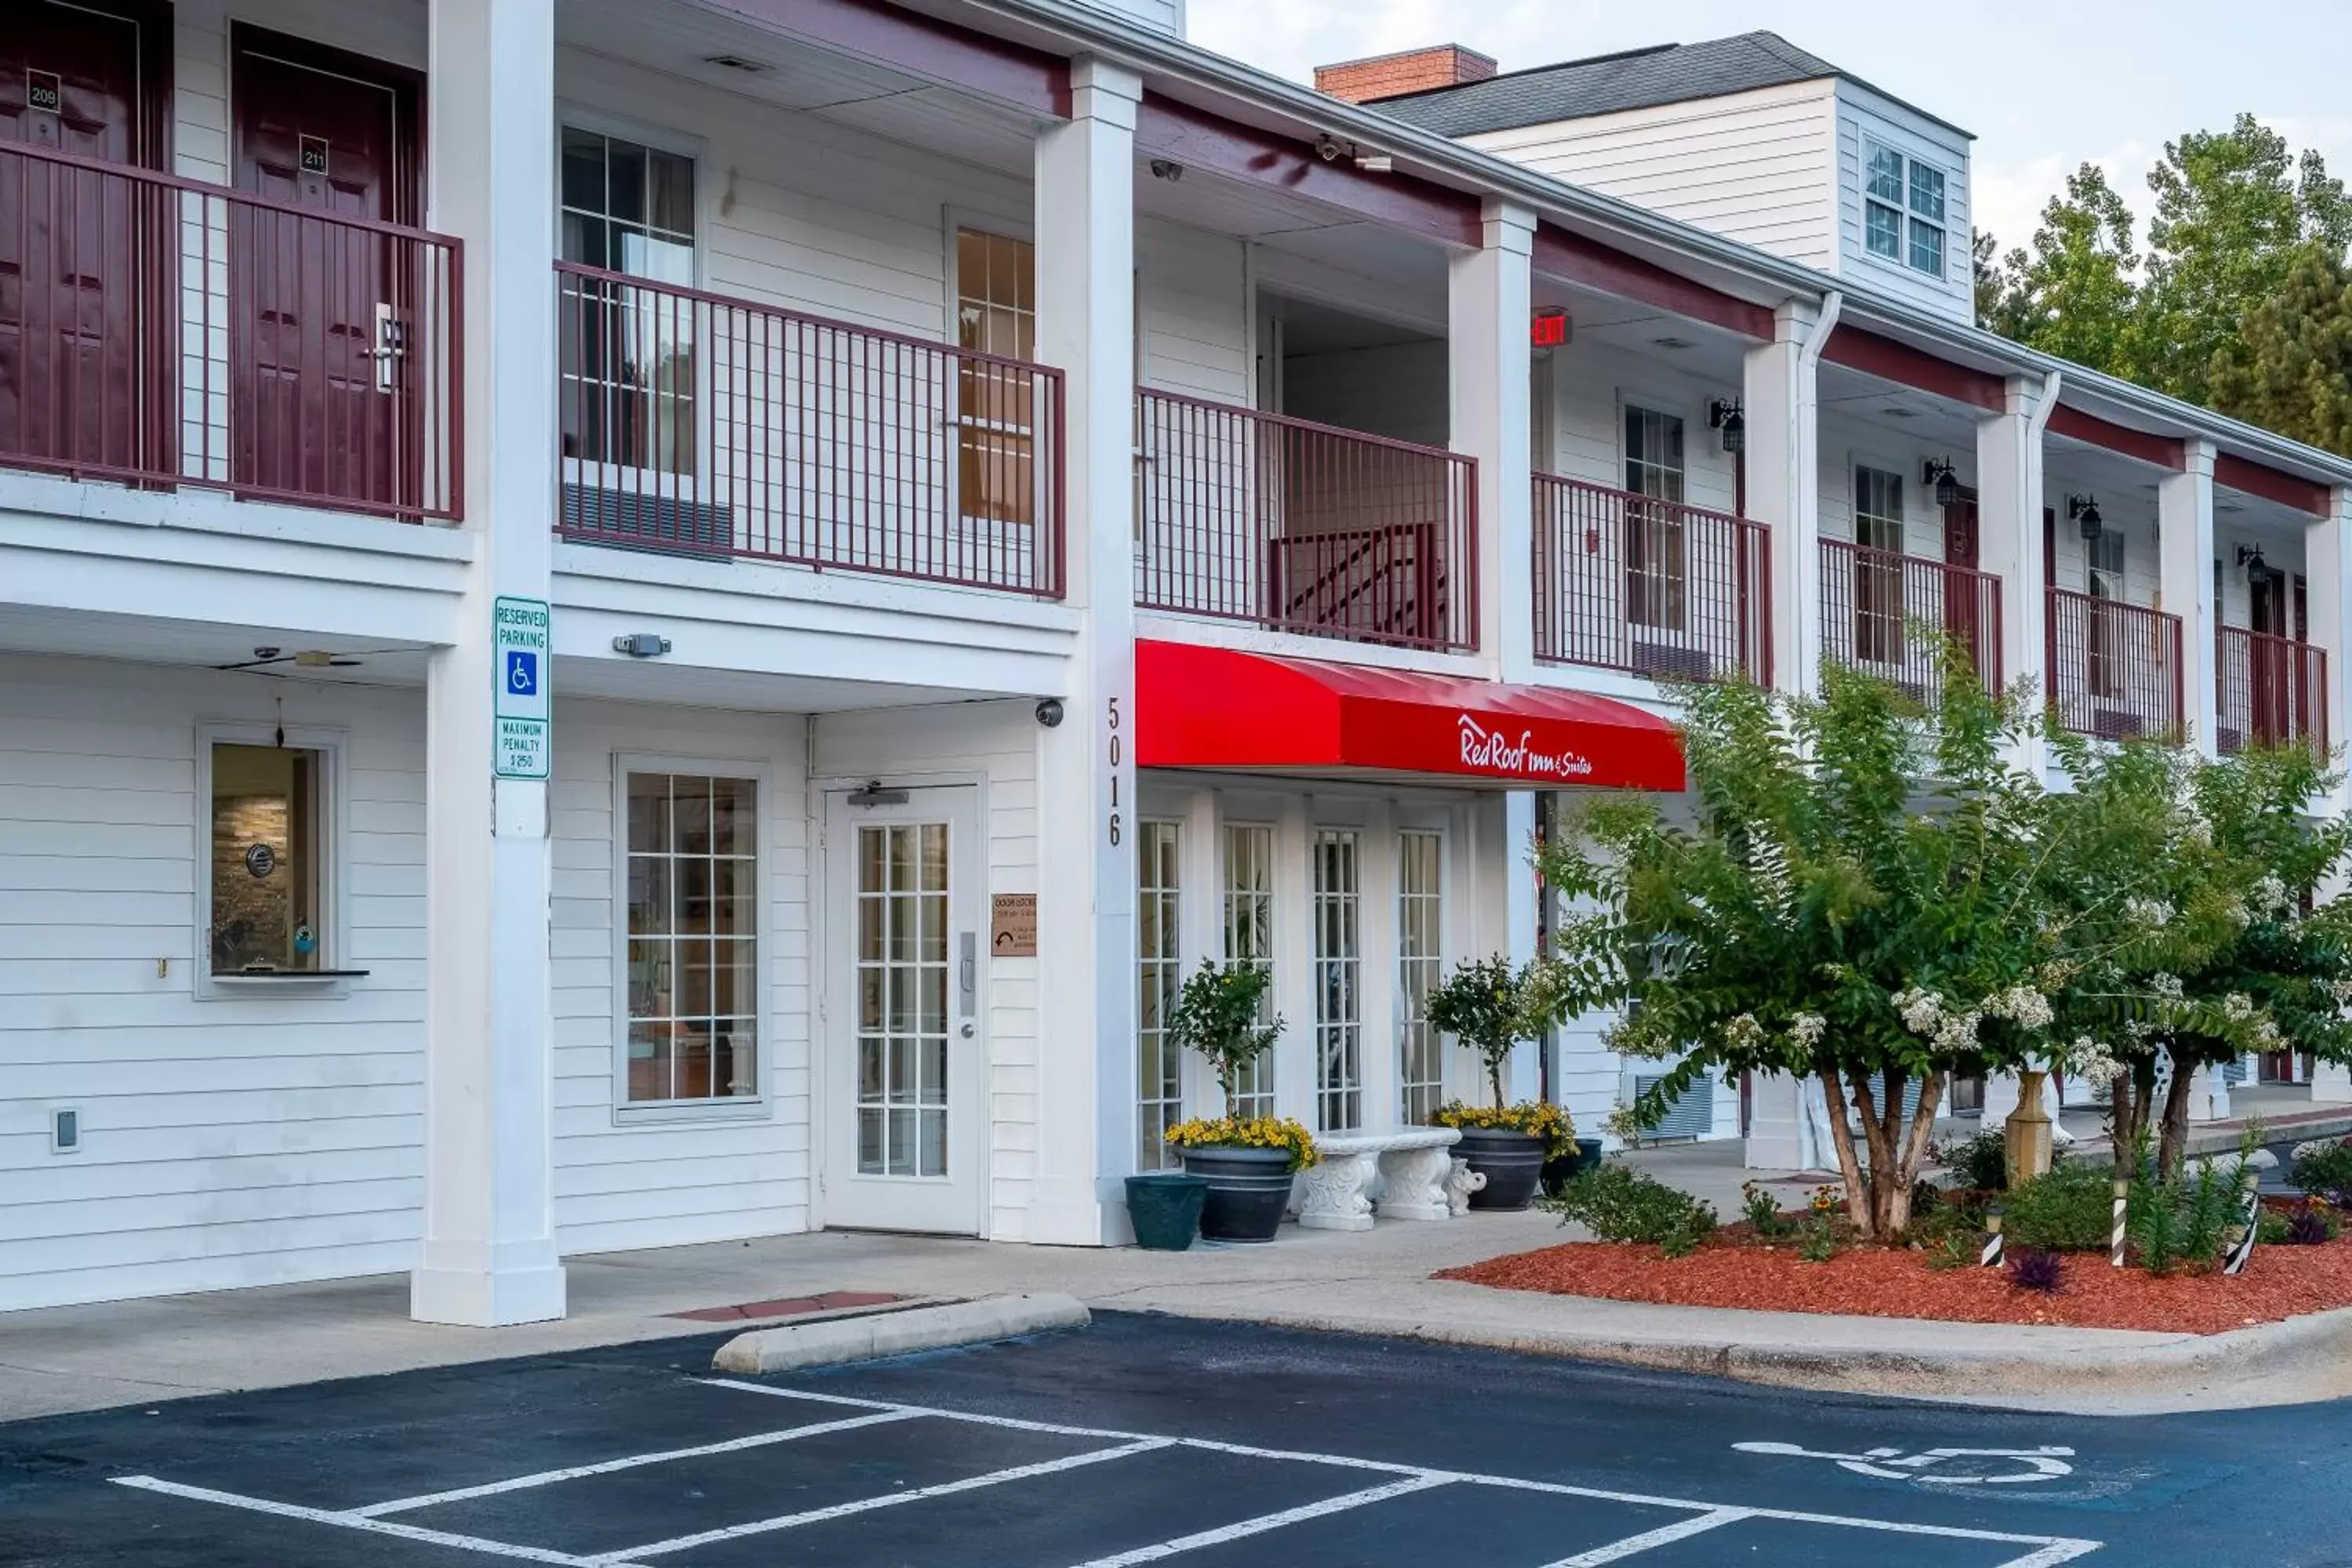 Property building, Facade/Entrance in Red Roof Inn & Suites Wilson